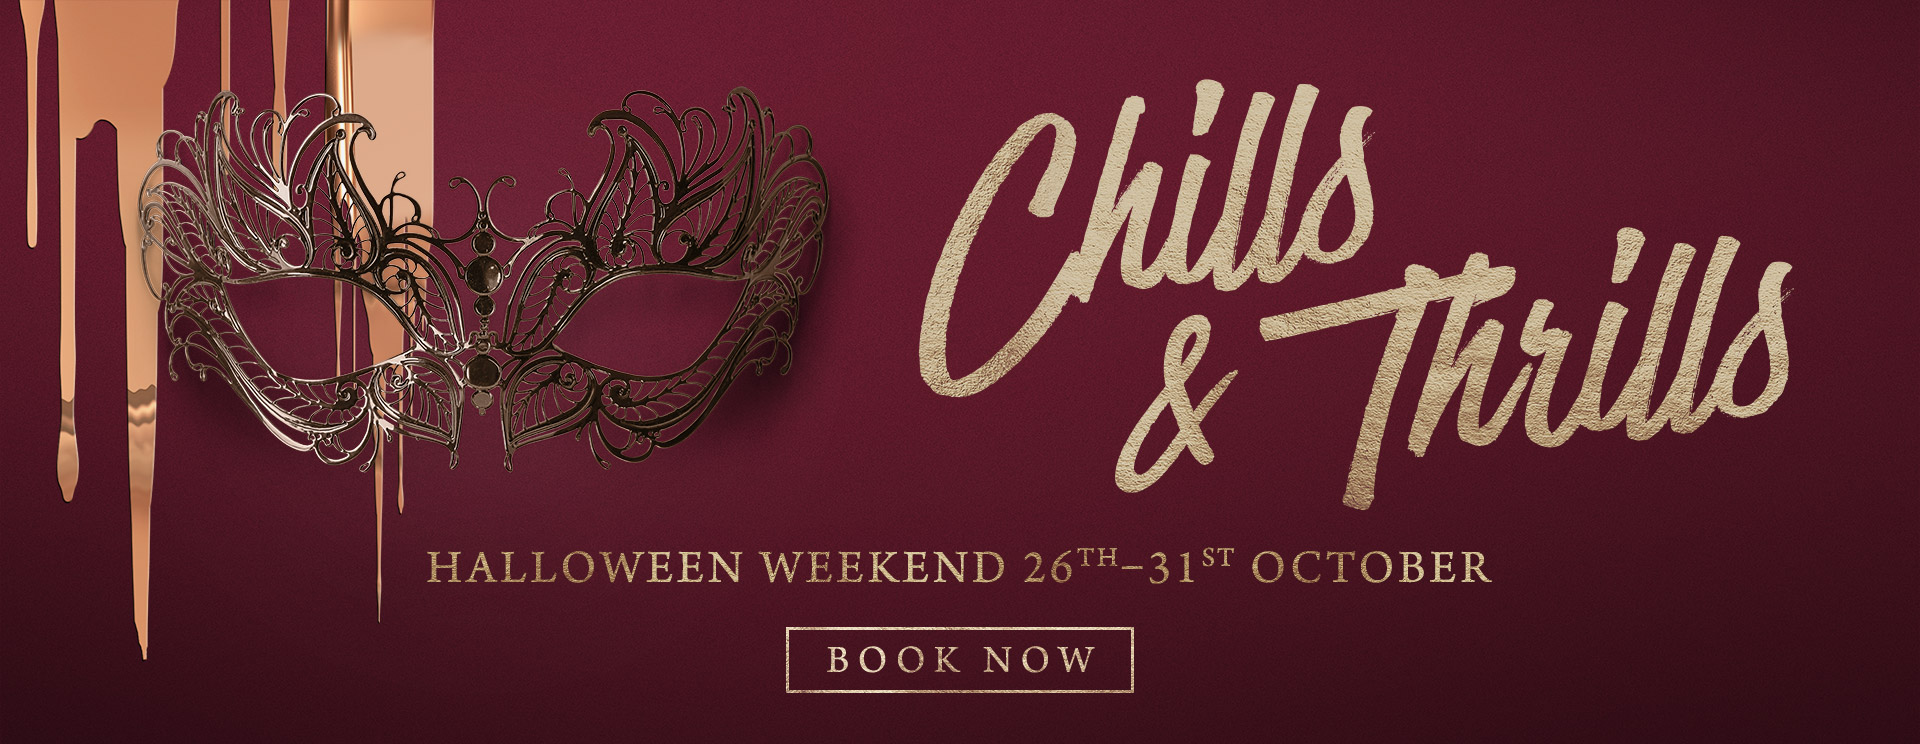 Chills & Thrills this Halloween at The Coombe Cellars